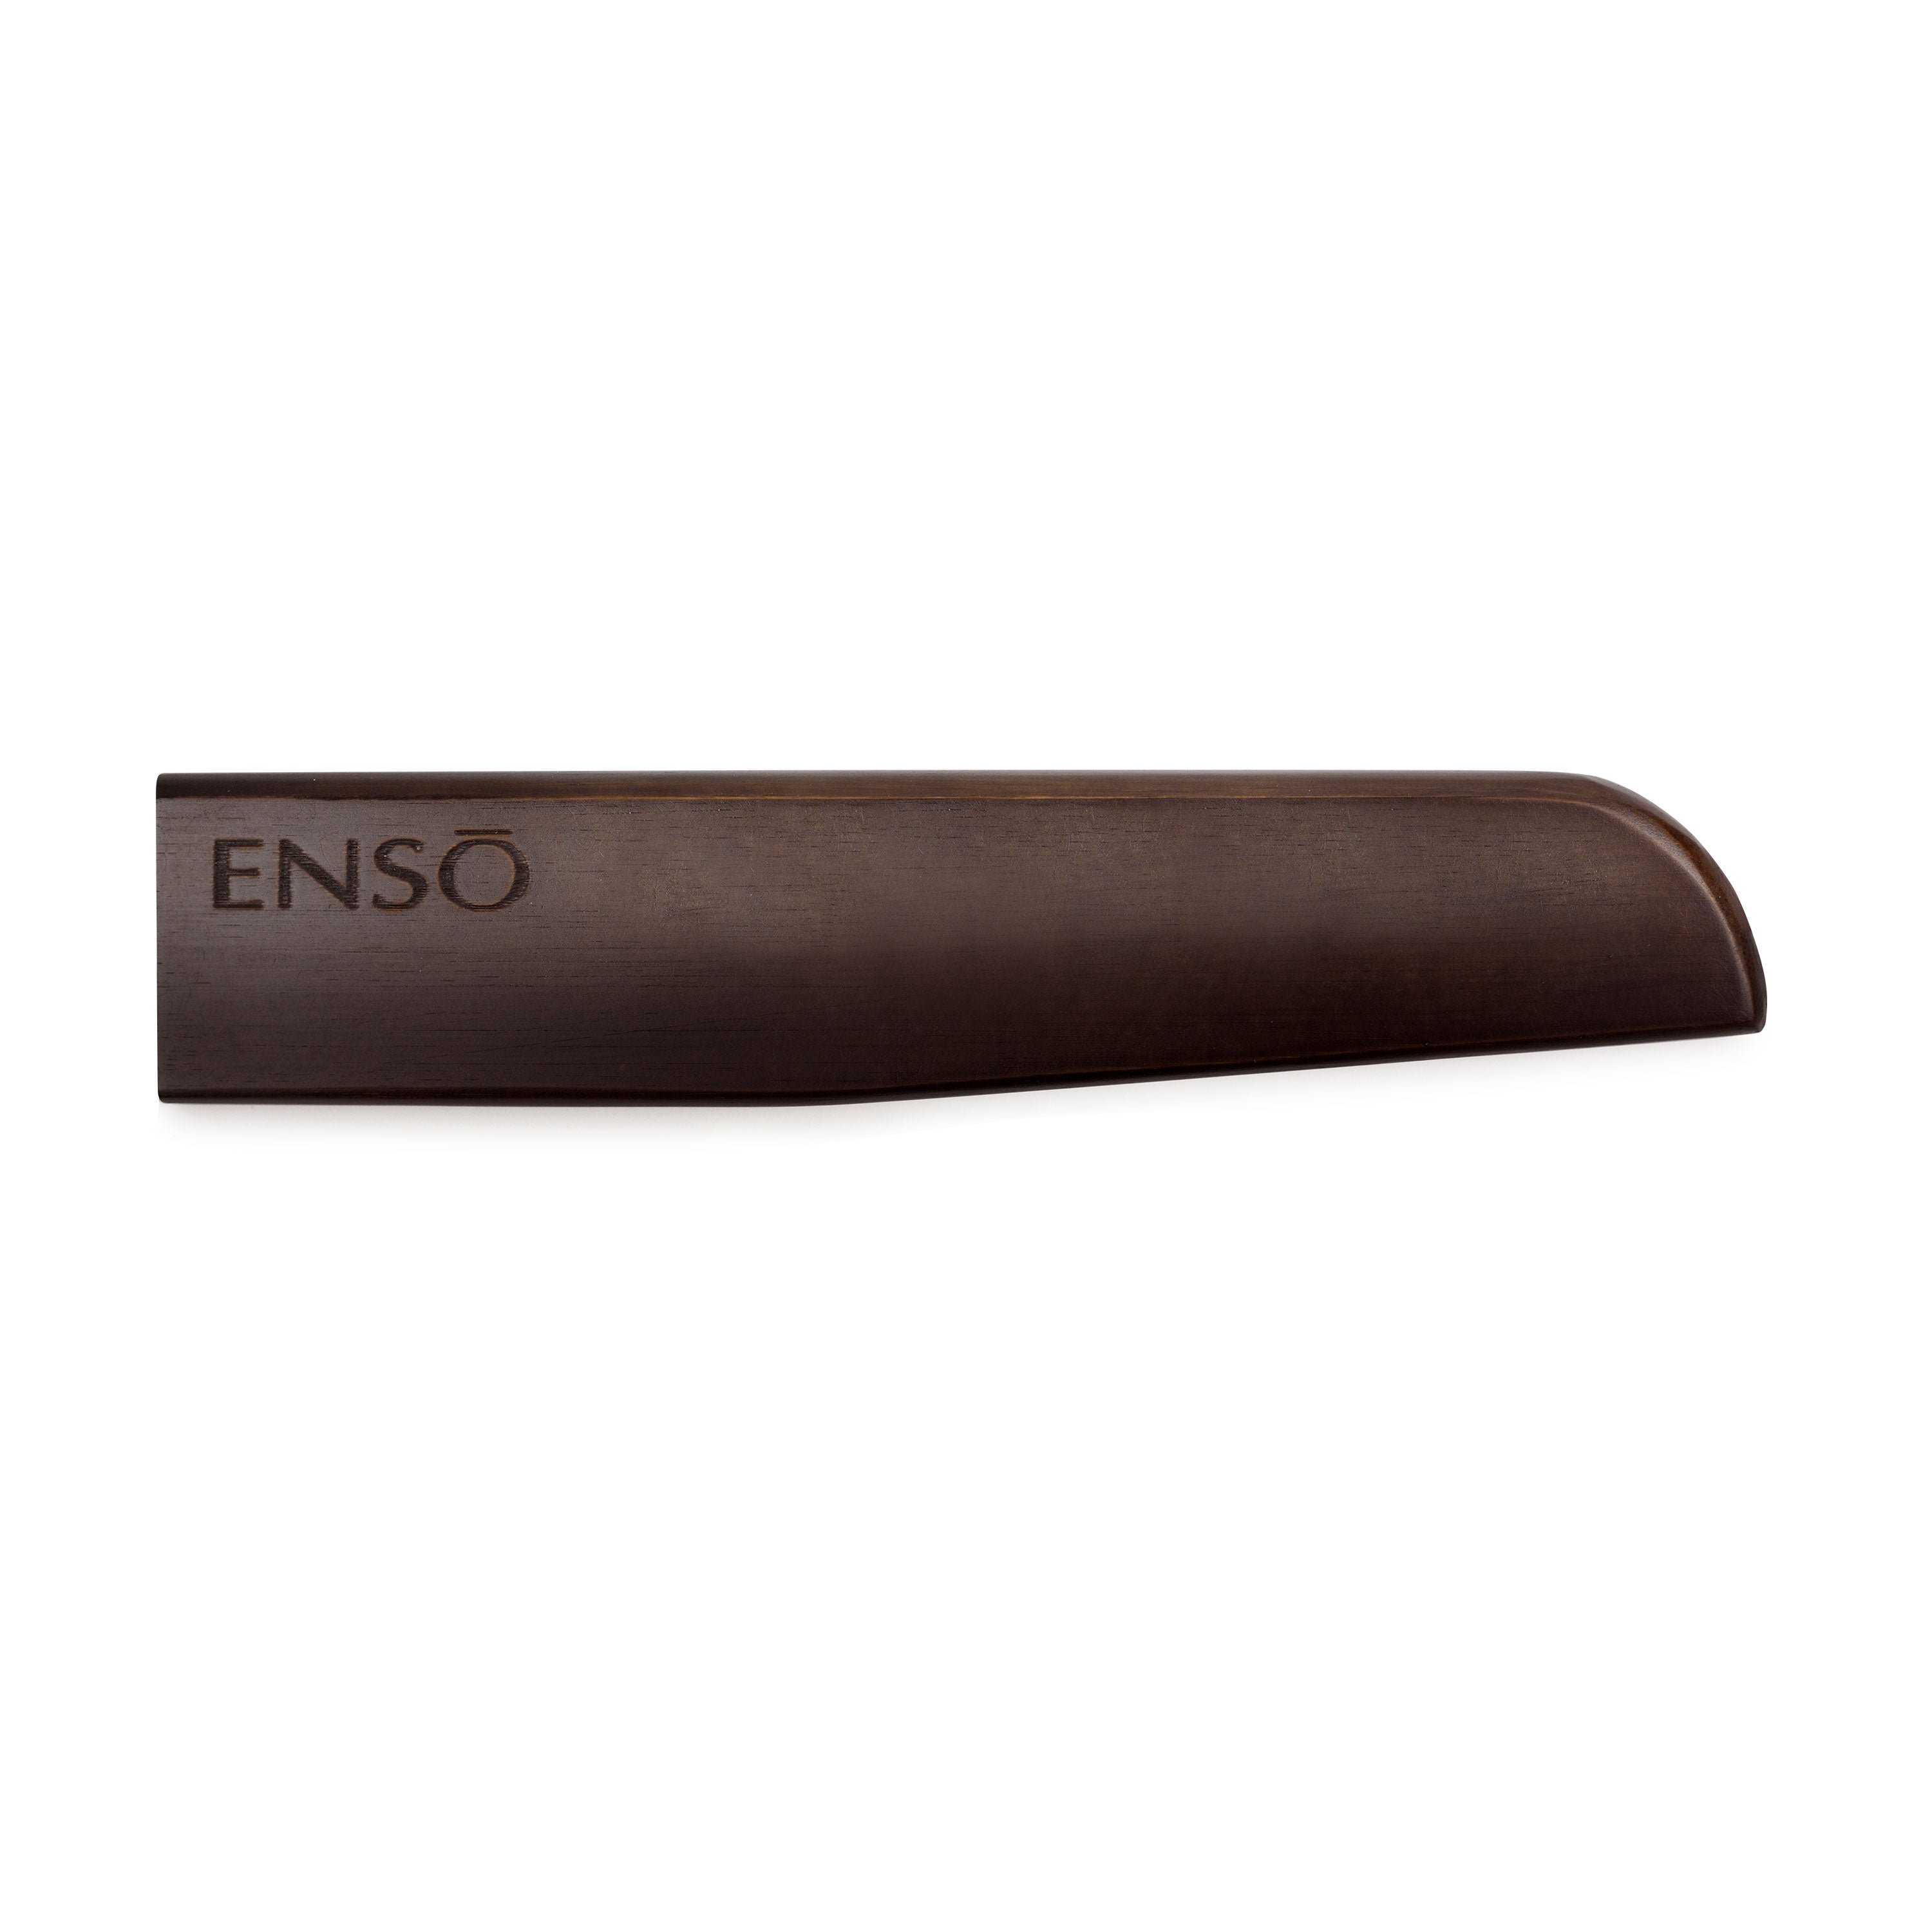 Enso Magnetic Sheath for 9-inch Bread & Slicing Knives – Cutlery and More